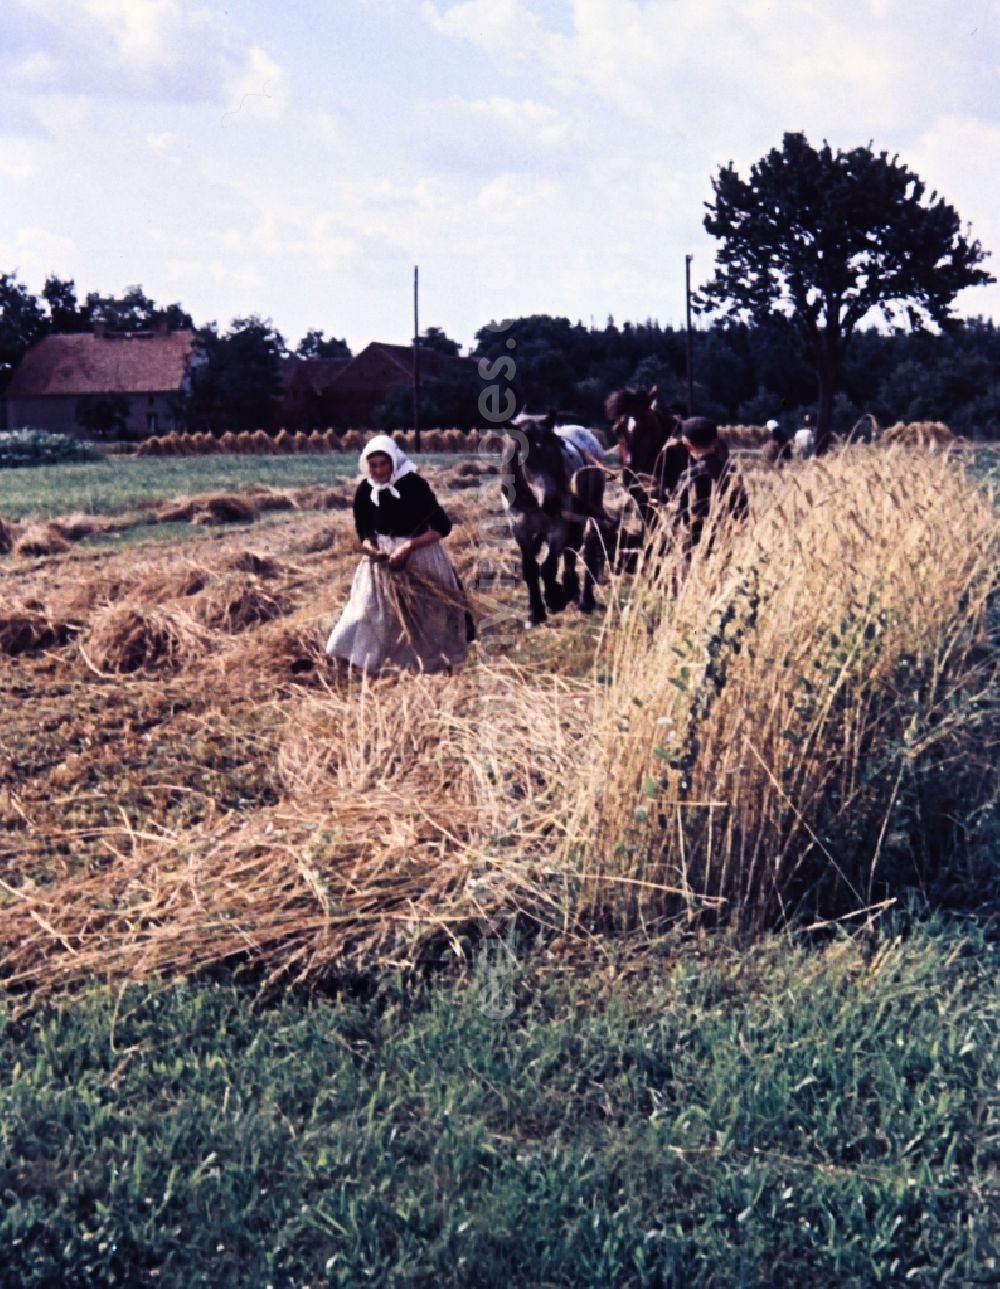 GDR picture archive: Teicha - Farmers harvesting grain and sheaf laying on a harvested field in Teicha in the state Saxony on the territory of the former GDR, German Democratic Republic